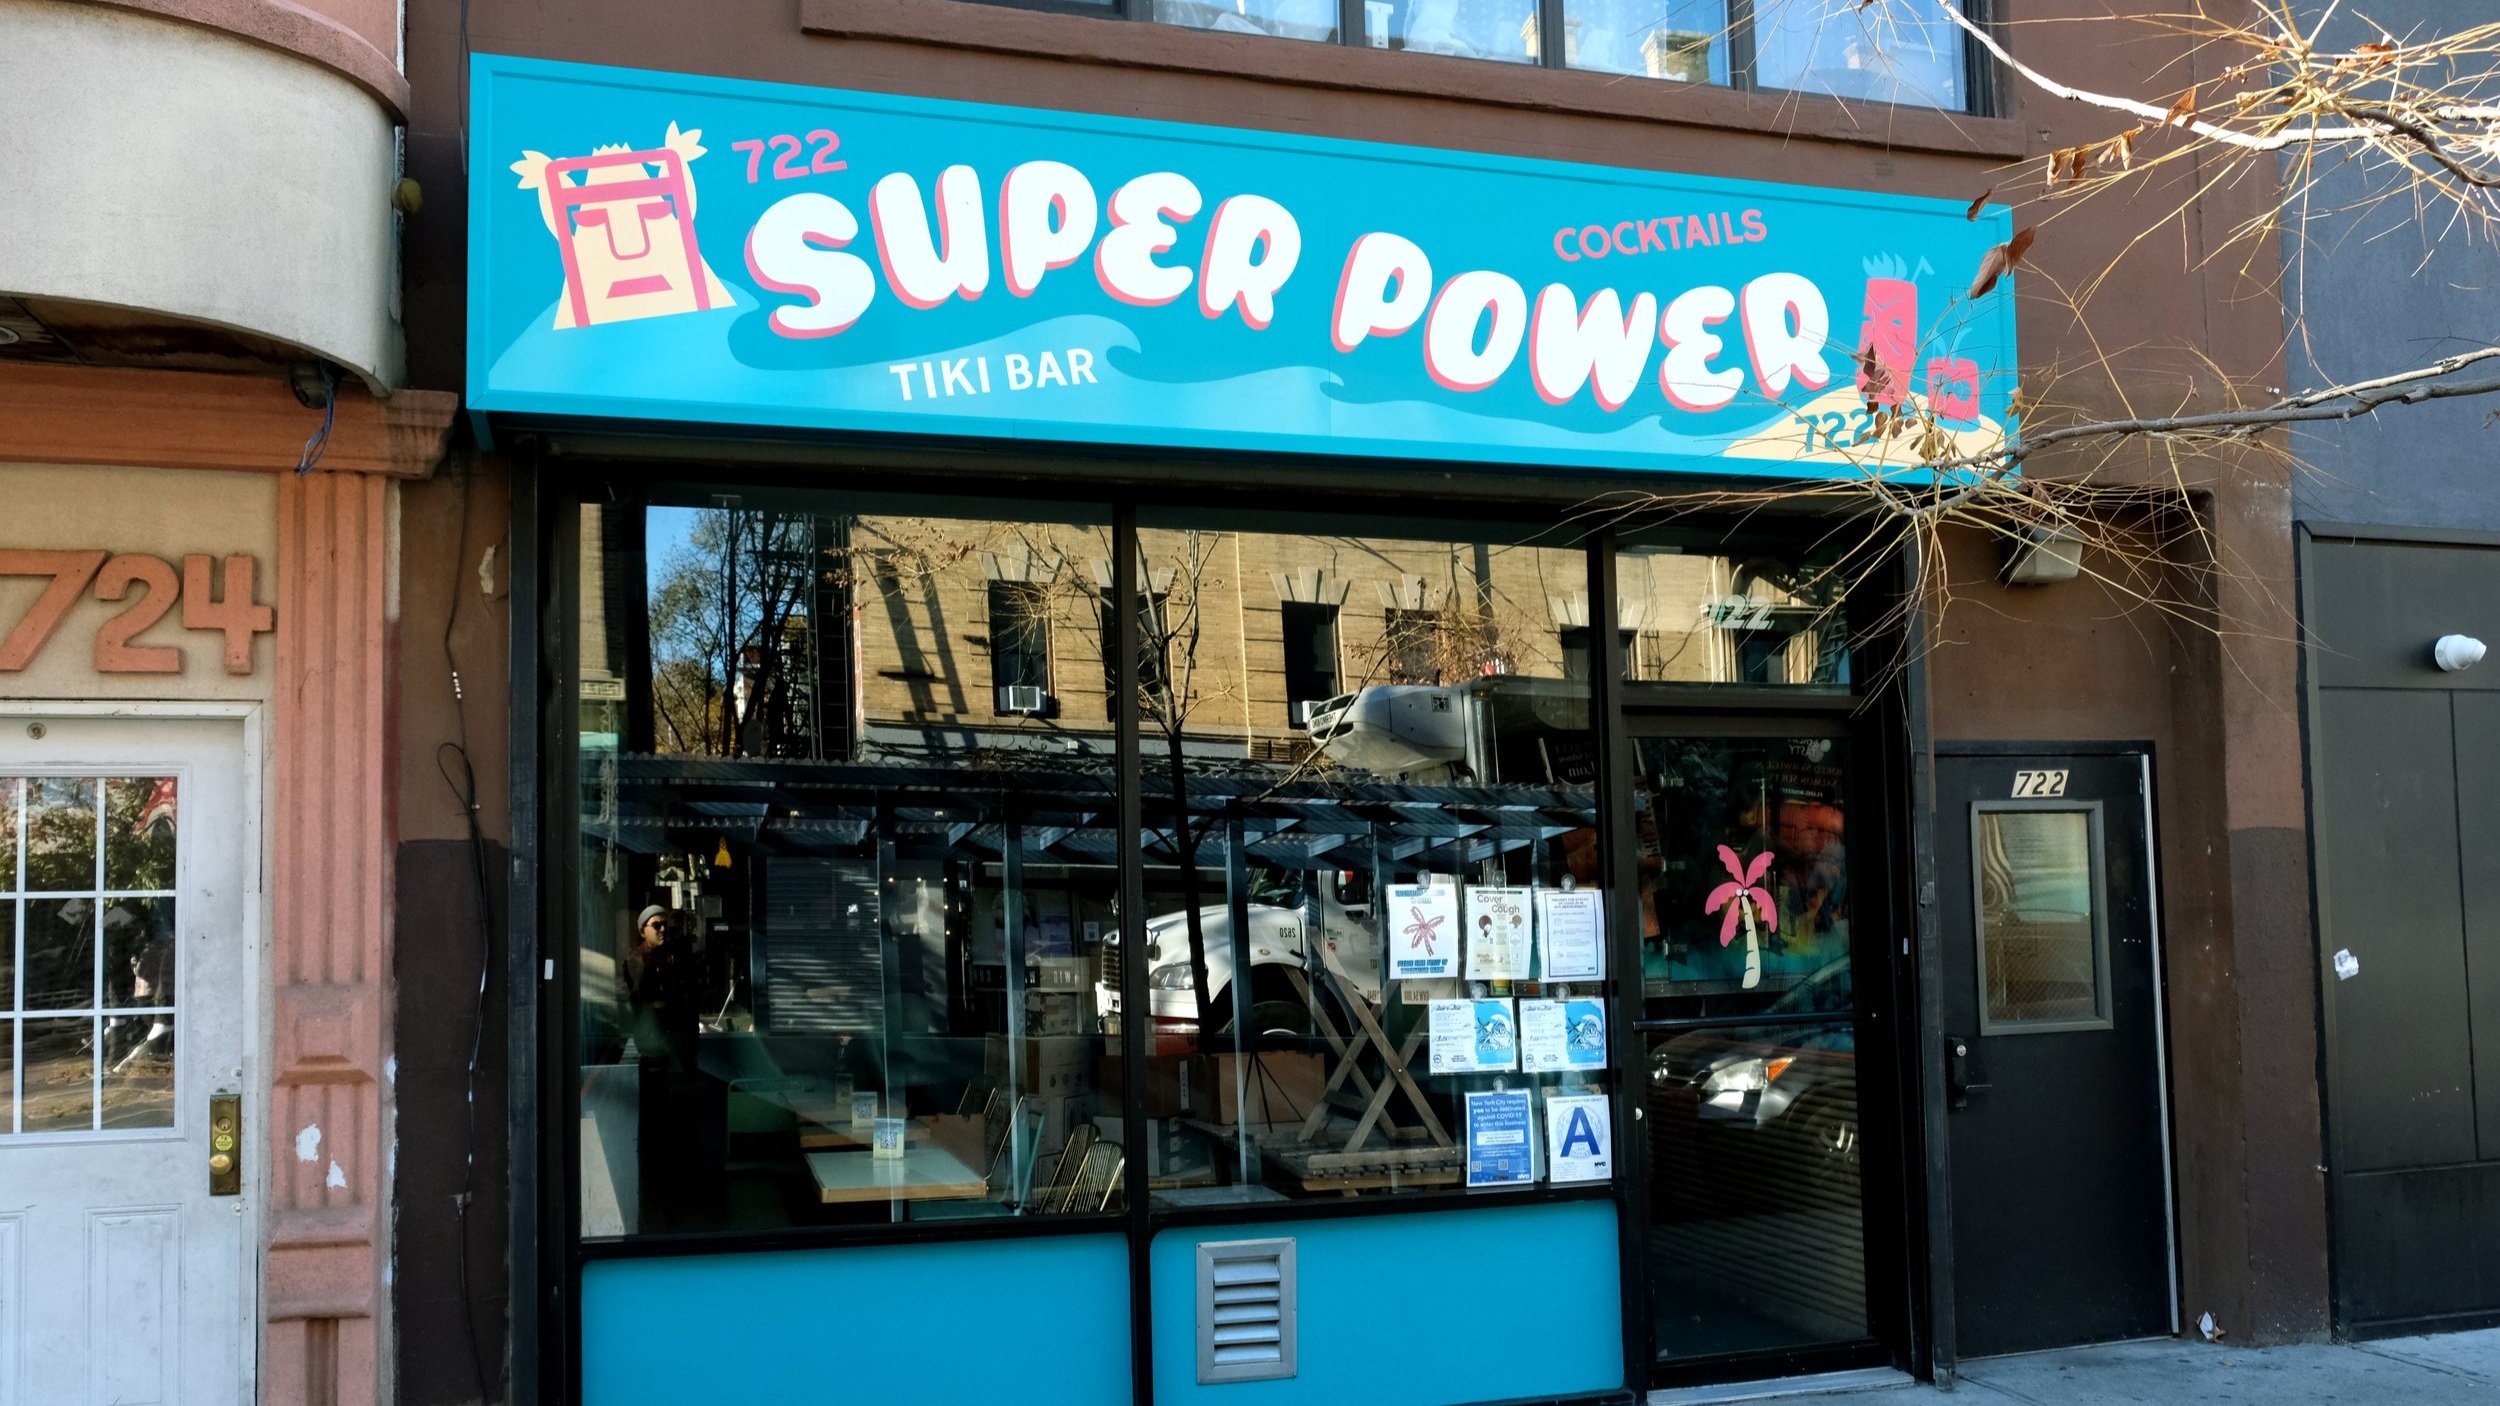  Light blue storefront sign reading “Superpower” in white bubbly handpainted letters, surrounded by handpainted tiki bar imagery 